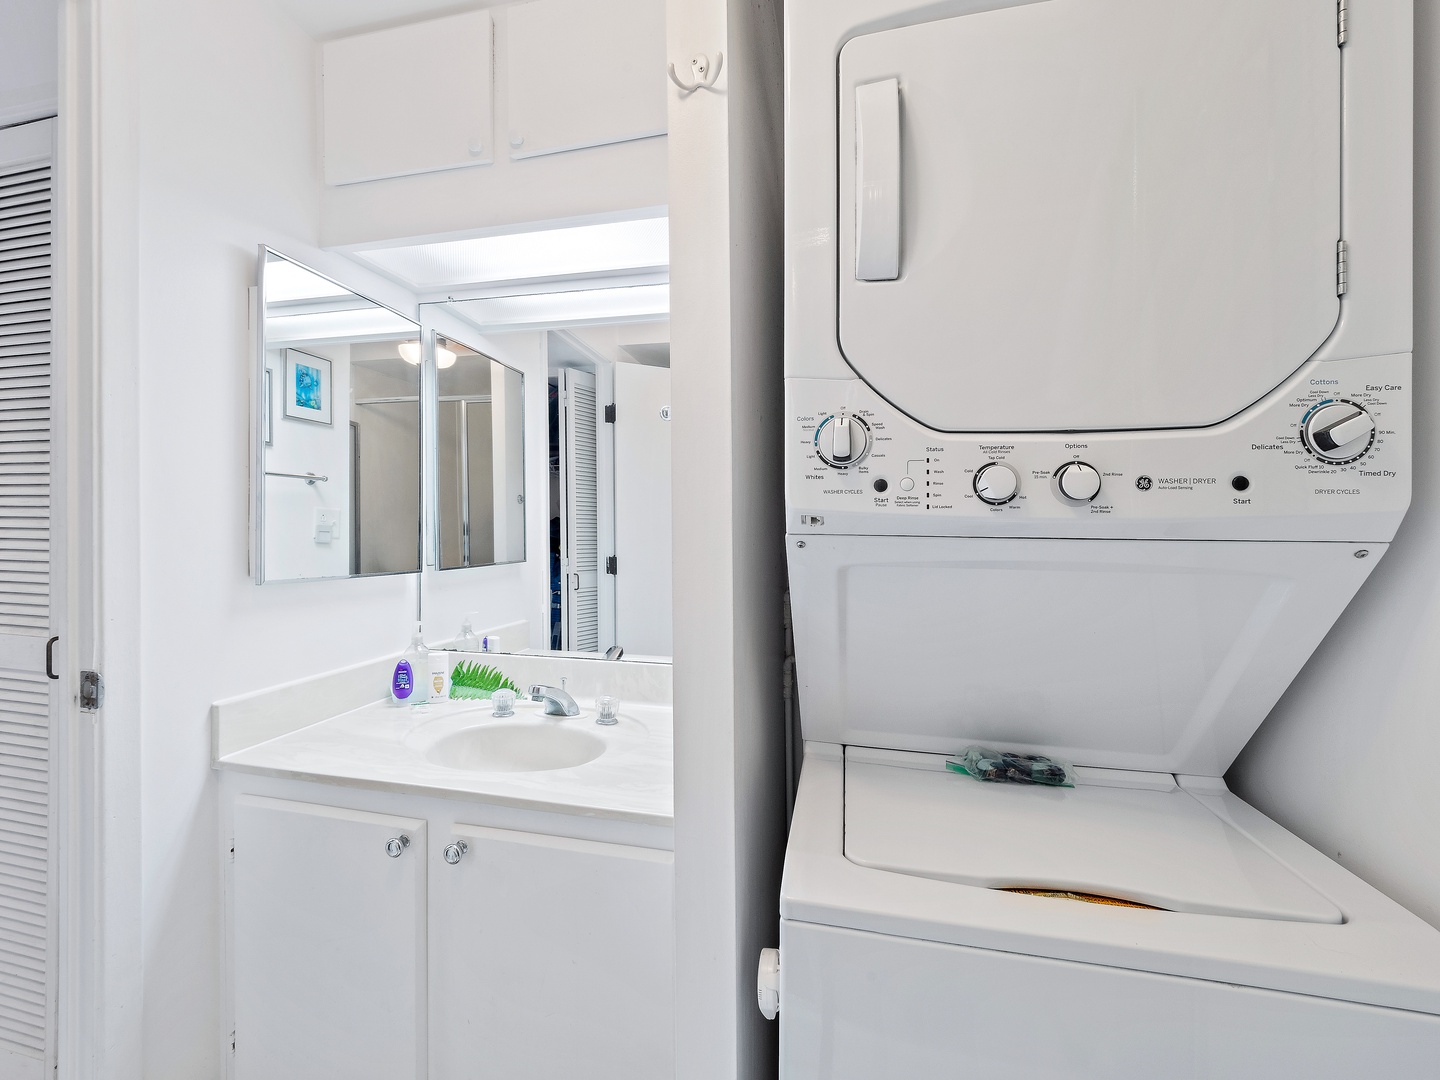 Shared bathroom with stand up shower, and stacked washer and dryer